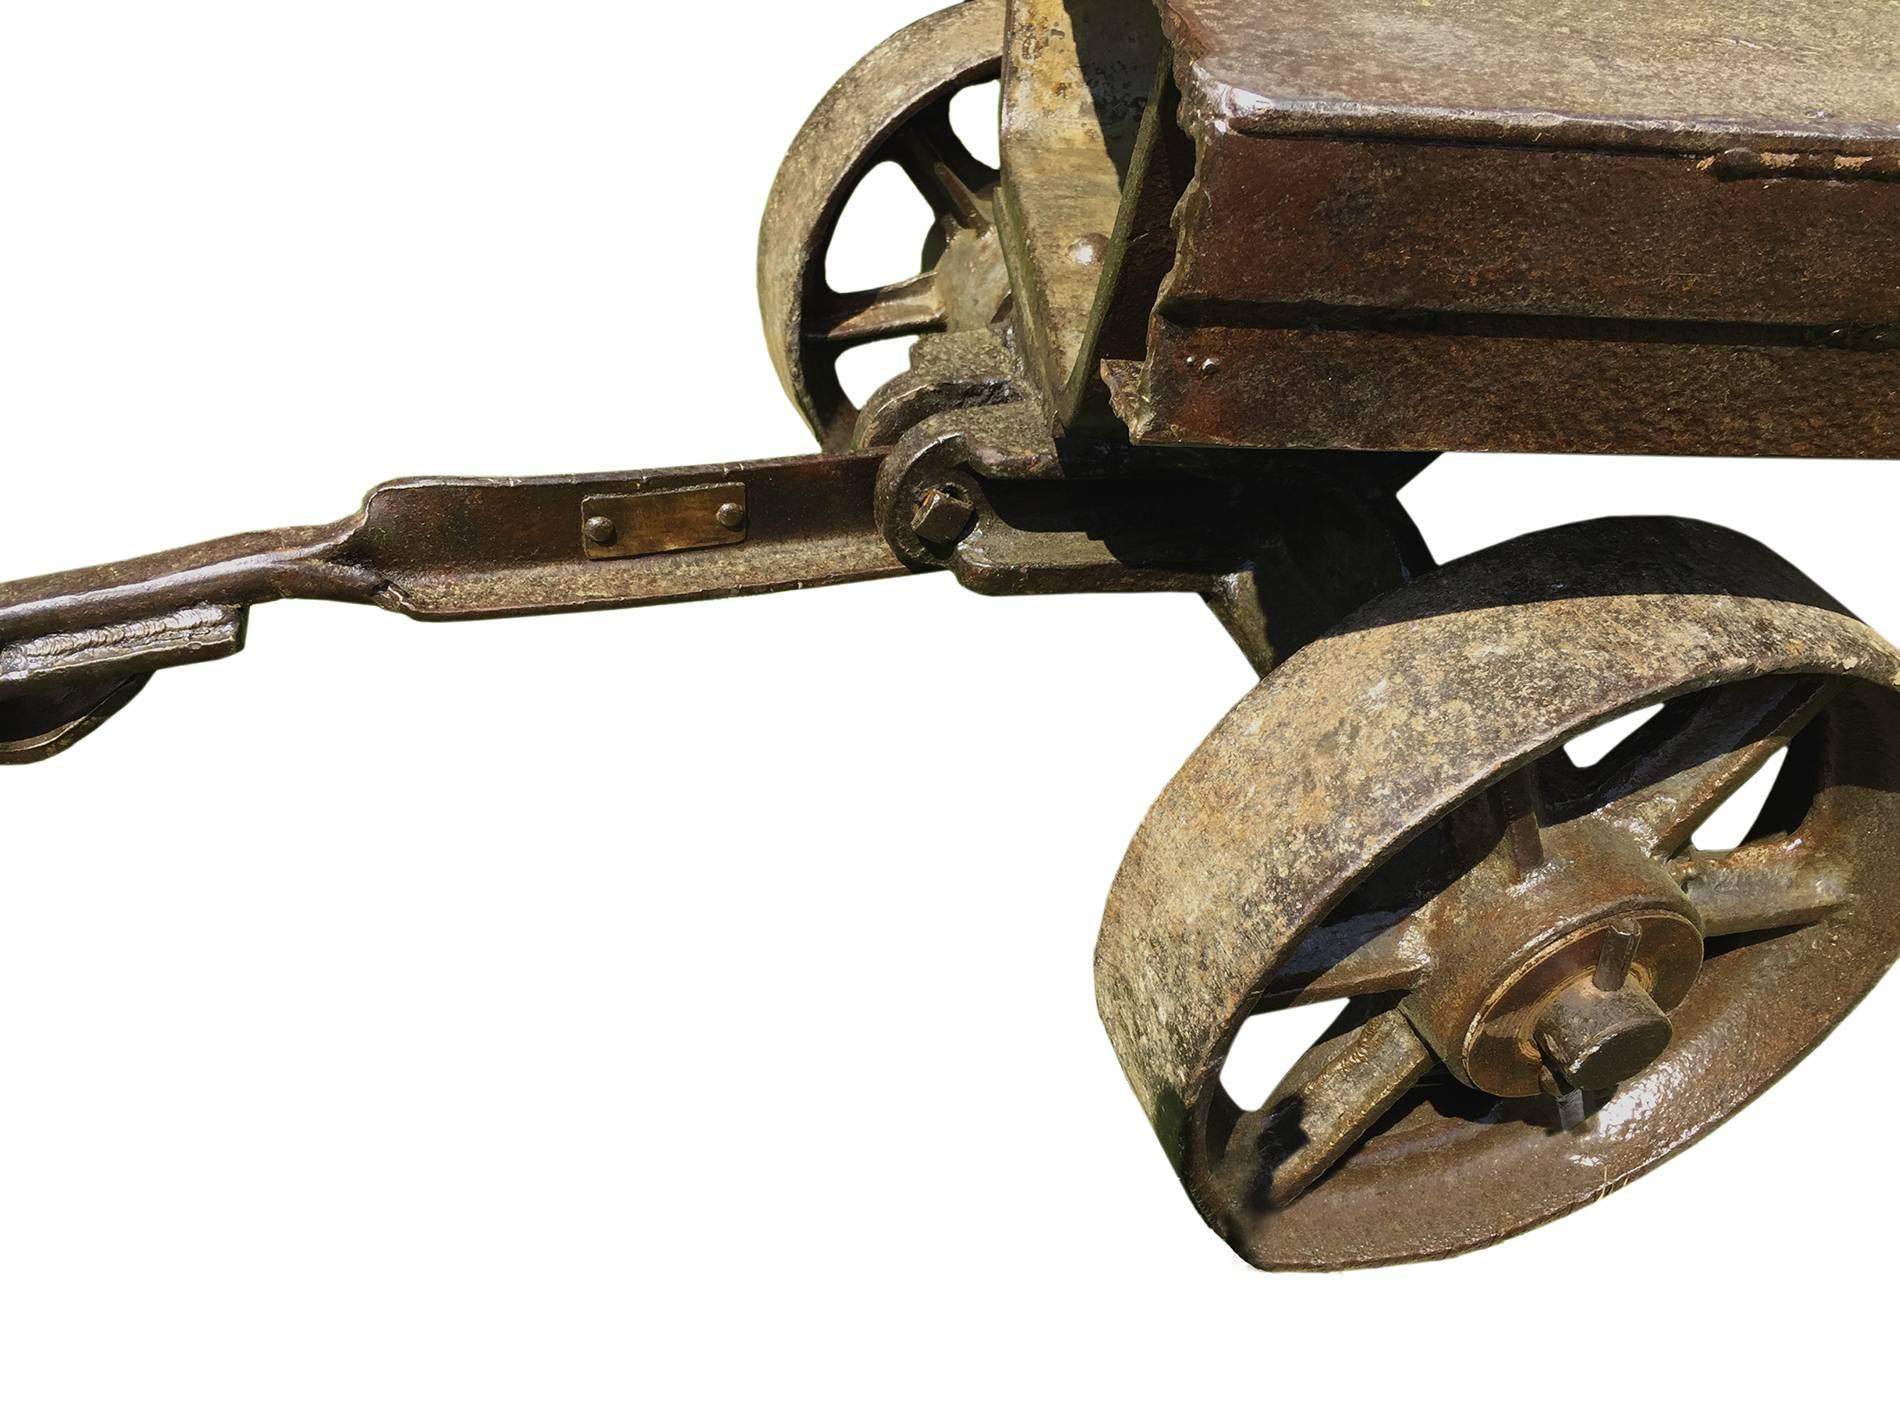 Iron and cast iron industrial wheelbarrows , rectangular shape , with 4 big wheels (11” diameter) and a long handle that allowing the front wheels to rotate . The top shelf has a thickness of 4 “ .